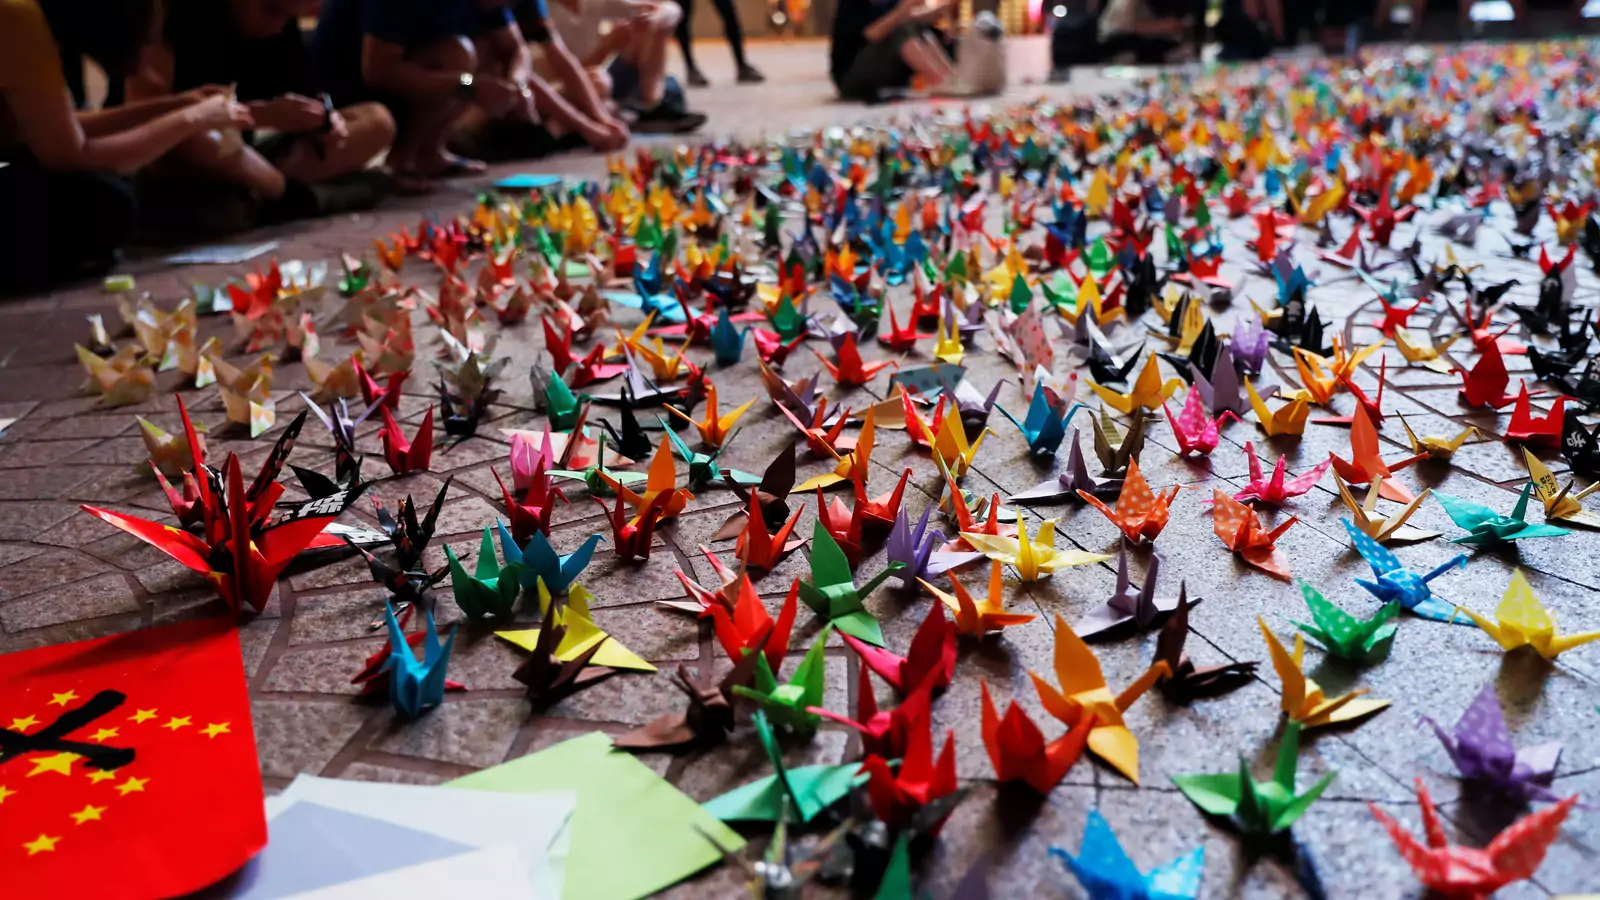 Thousands of paper cranes are folded by anti-government protesters to call for political reforms in Hong Kong on September 29, 2019.